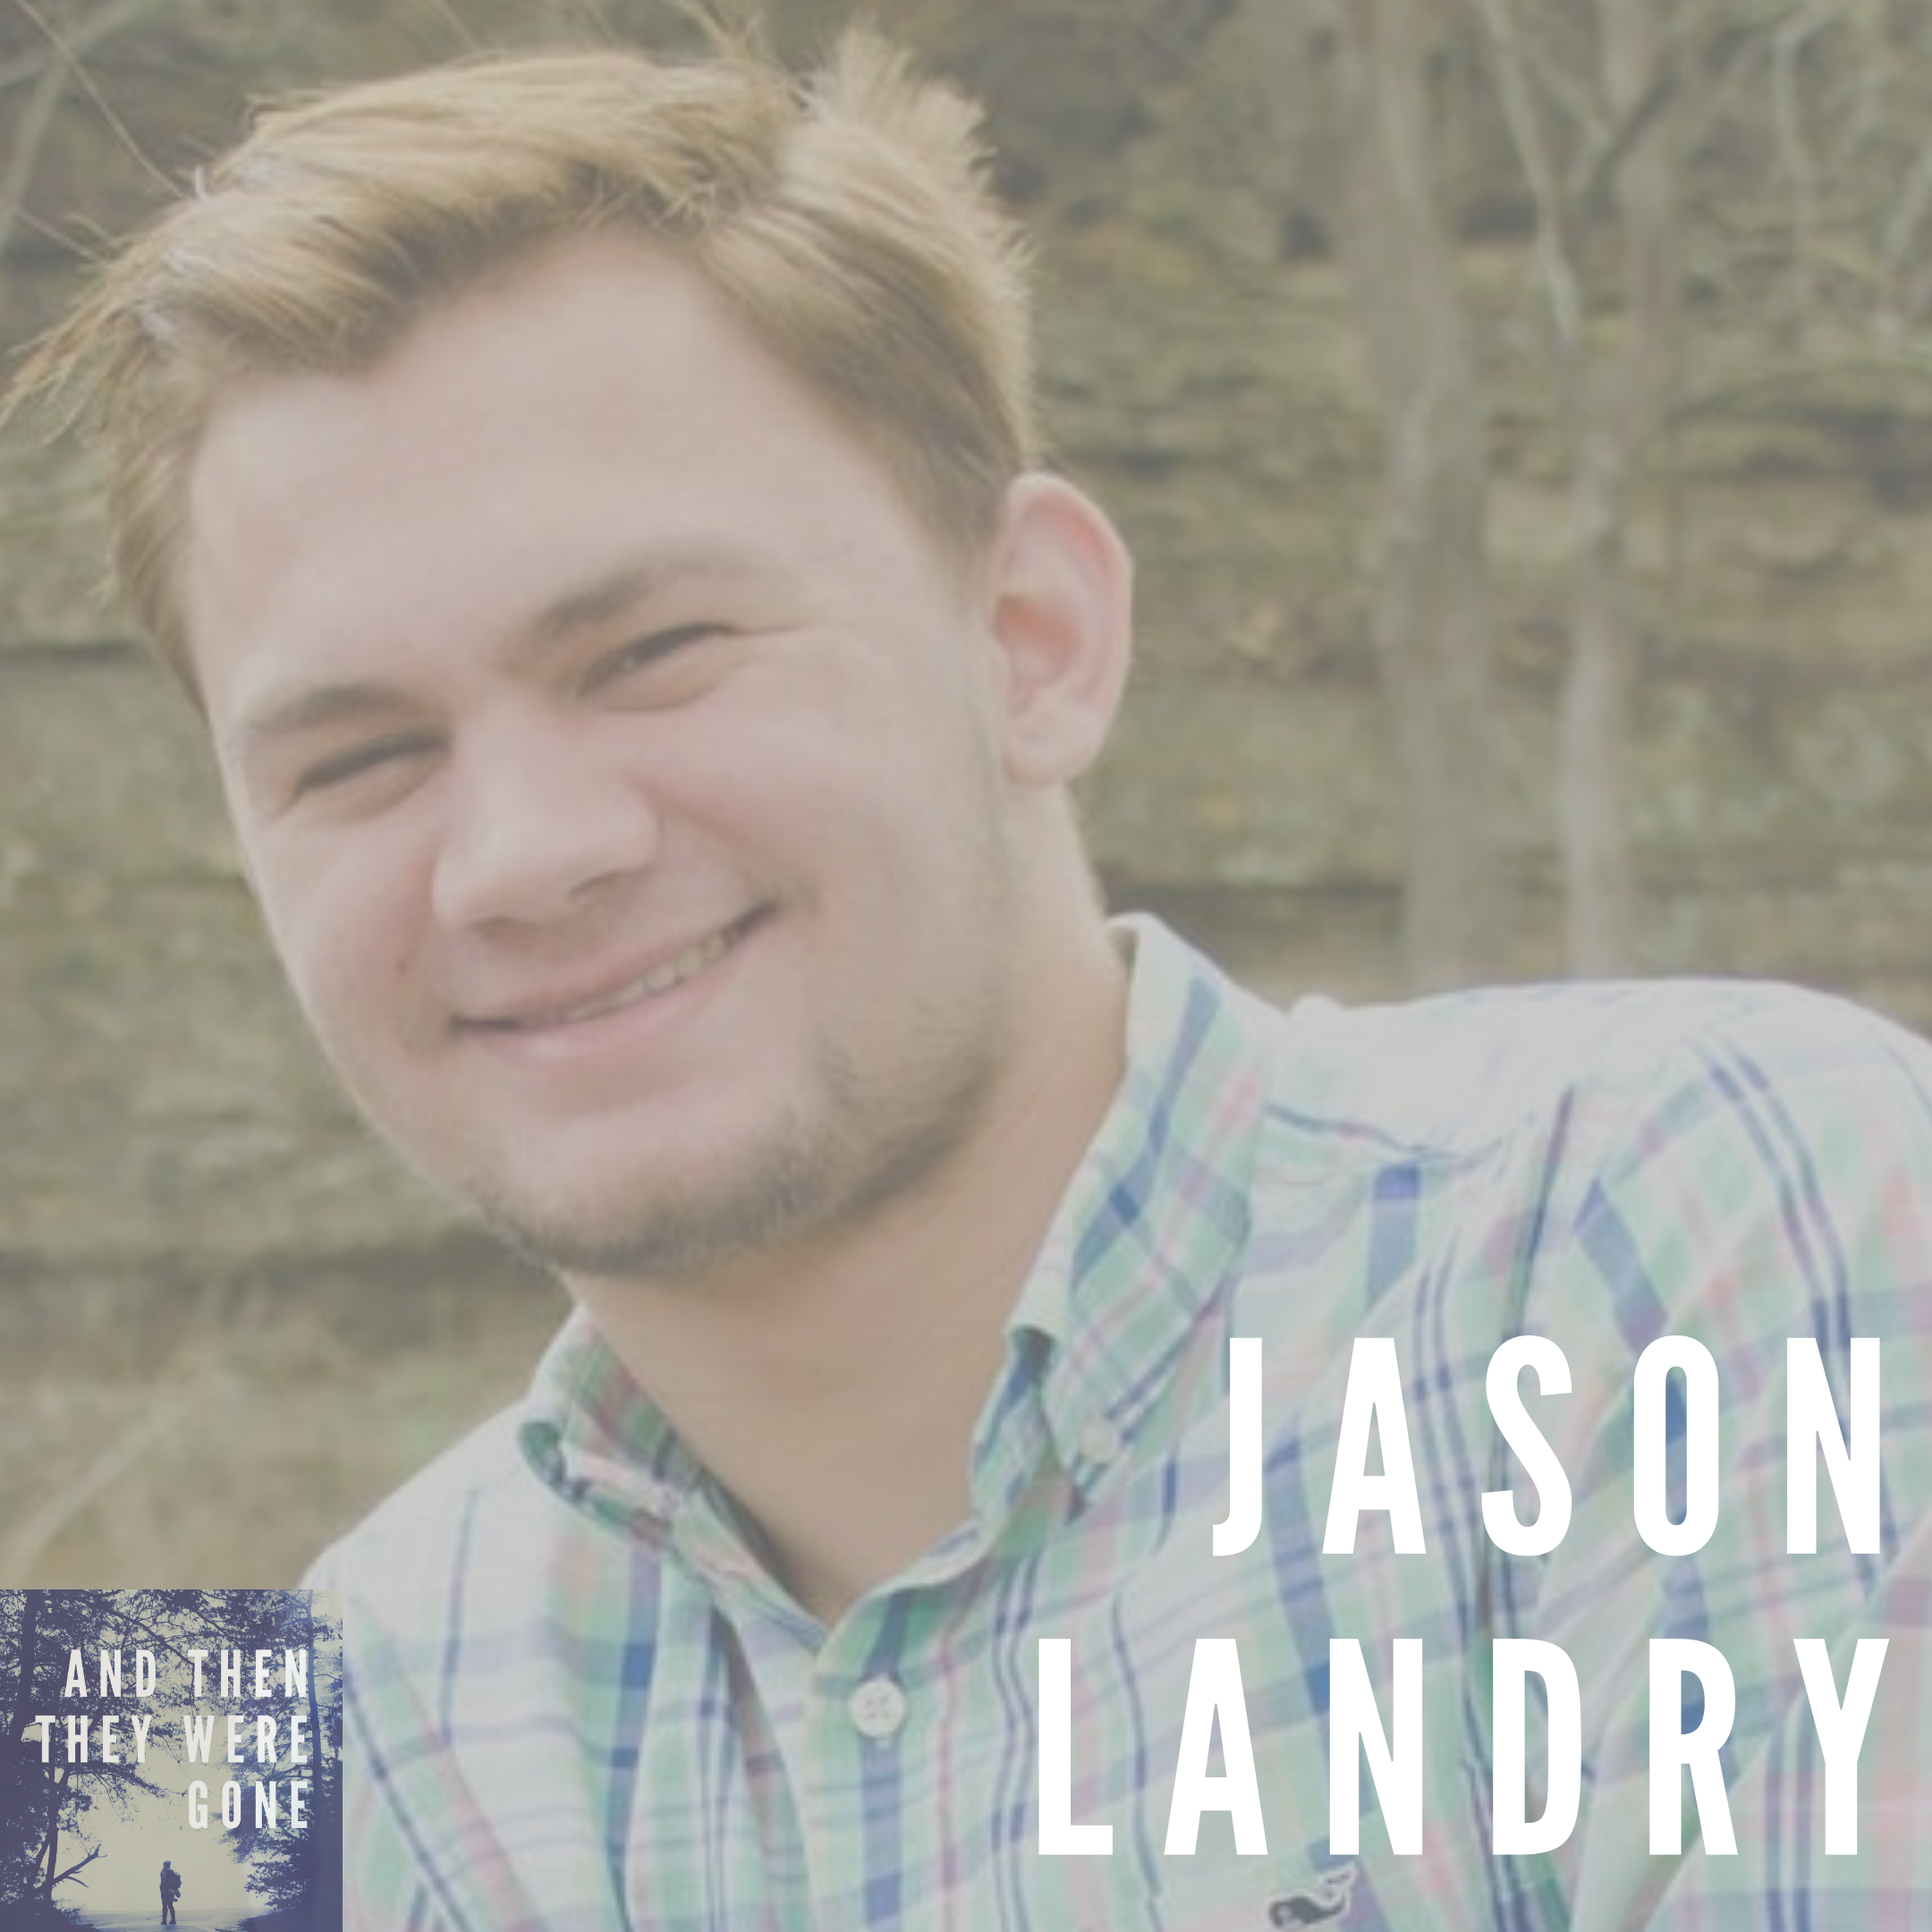 Jason Landry has been missing from Luling, Texas since December 13, 2020